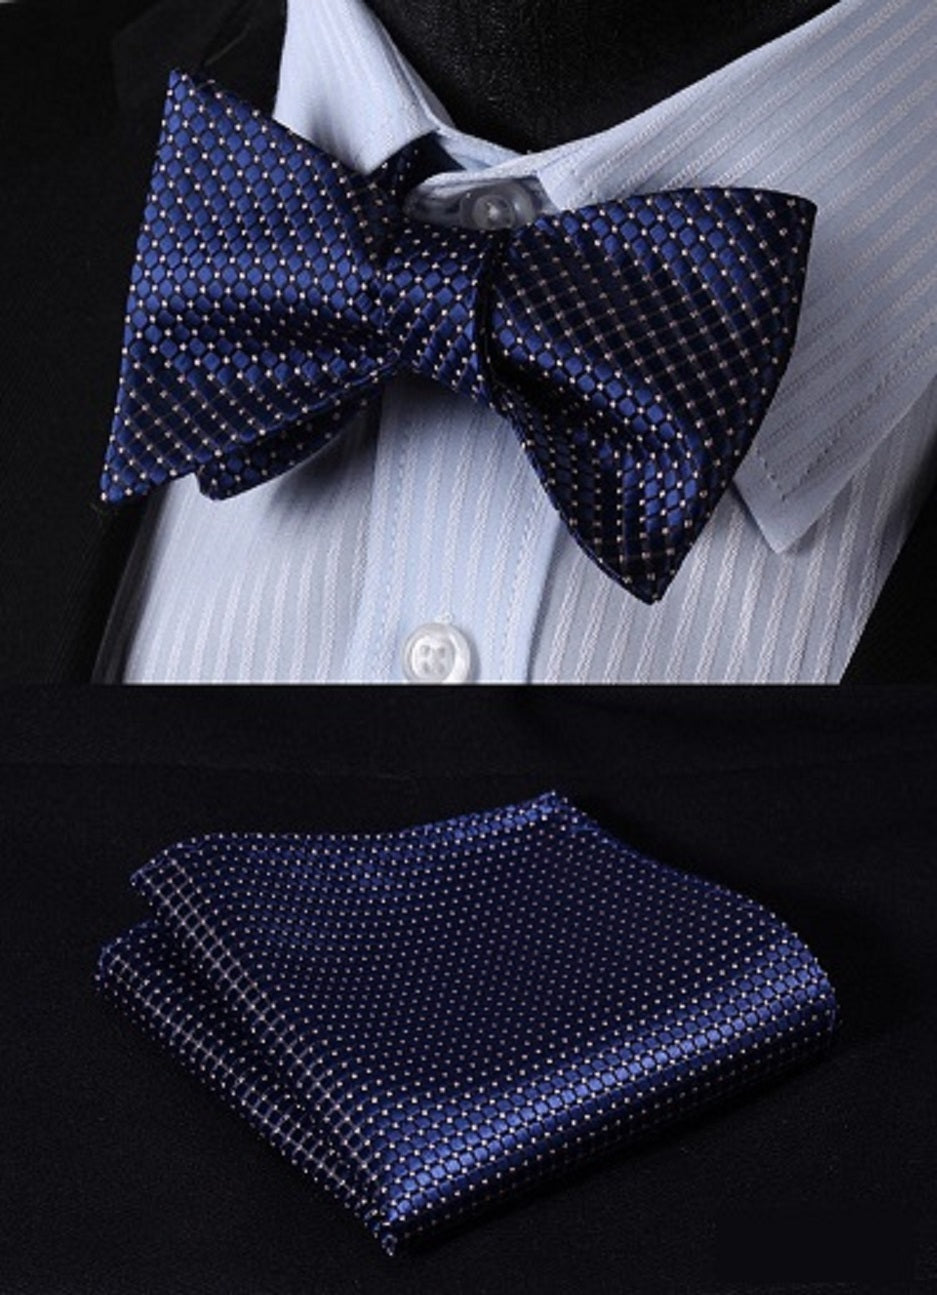 A Dark Blue Small Geometric Diamond With Small Dots Pattern Silk Self Tie Bow Tie With Matching Pocket Square and Cuff-links||Blue with White Dots